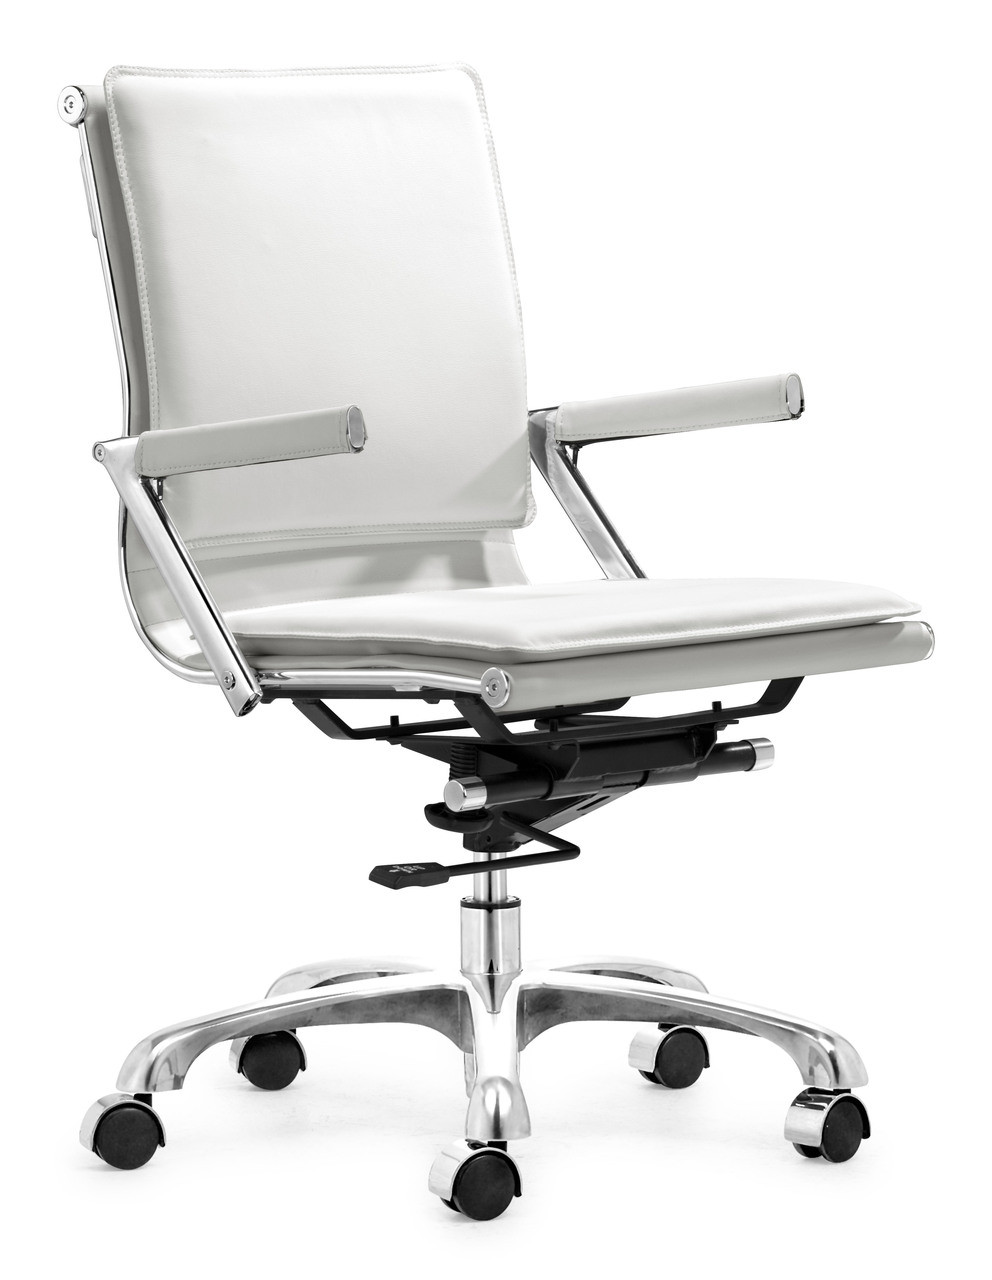 Lider Plus Office Chair White, ZO-215214